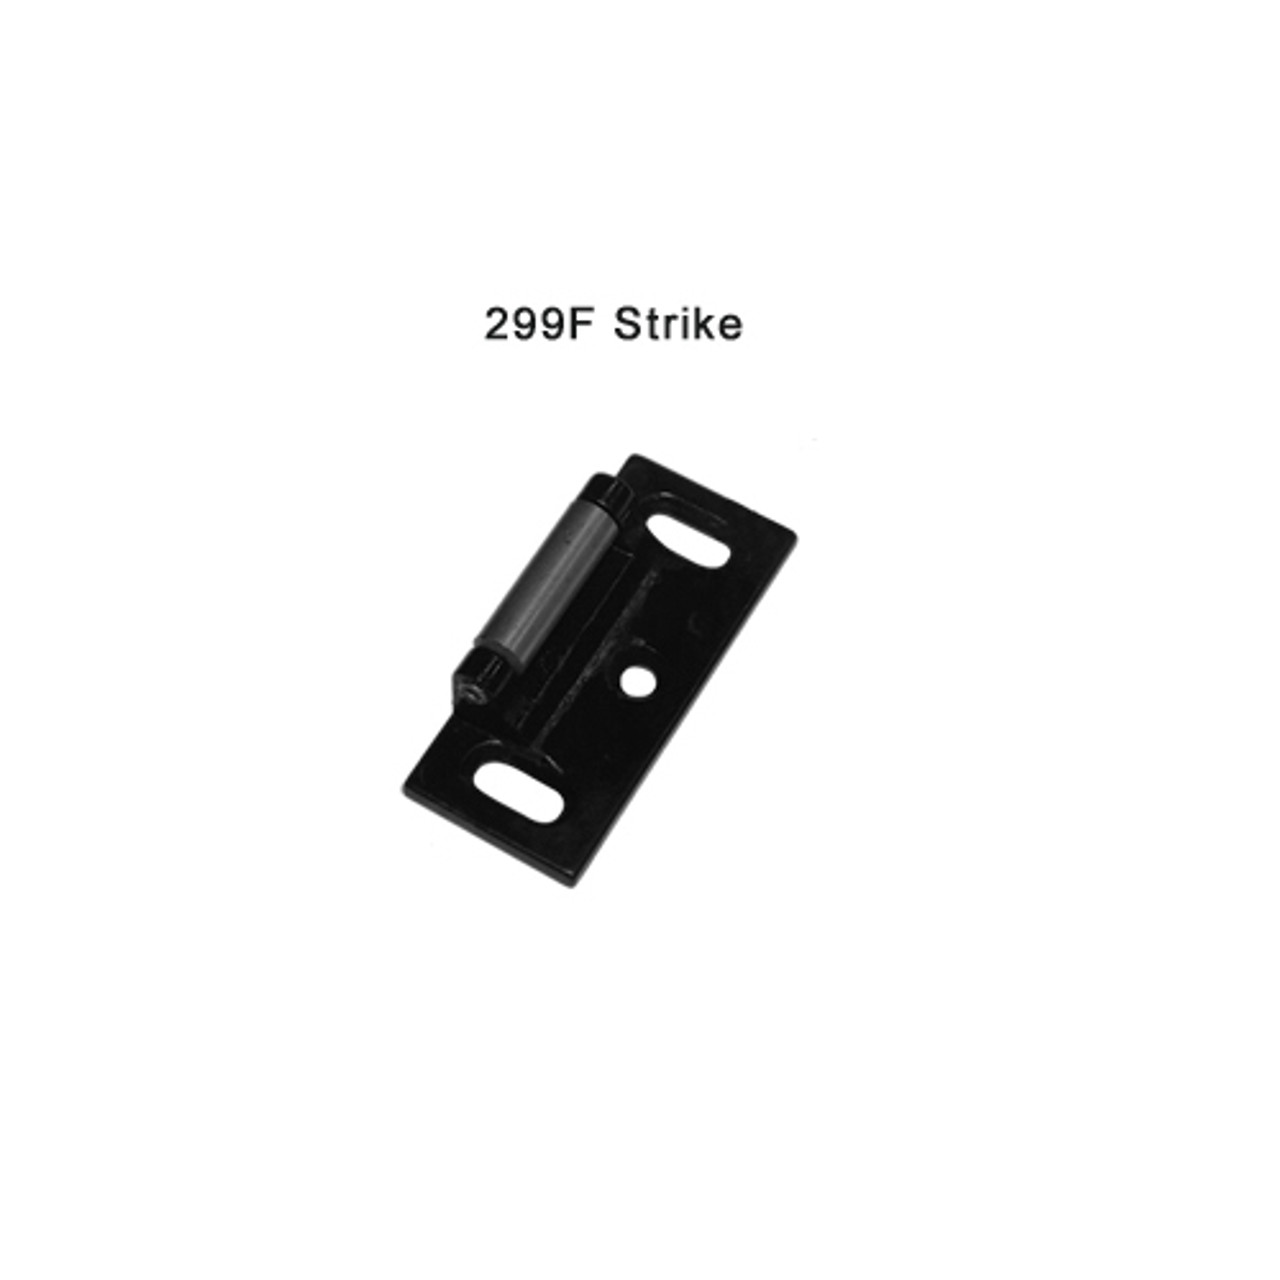 F-24-R-NL-OP-US32D-4 Falcon 24 Series Night Latch with Less Trim Fire Rated Rim Exit Device in Satin Stainless Steel